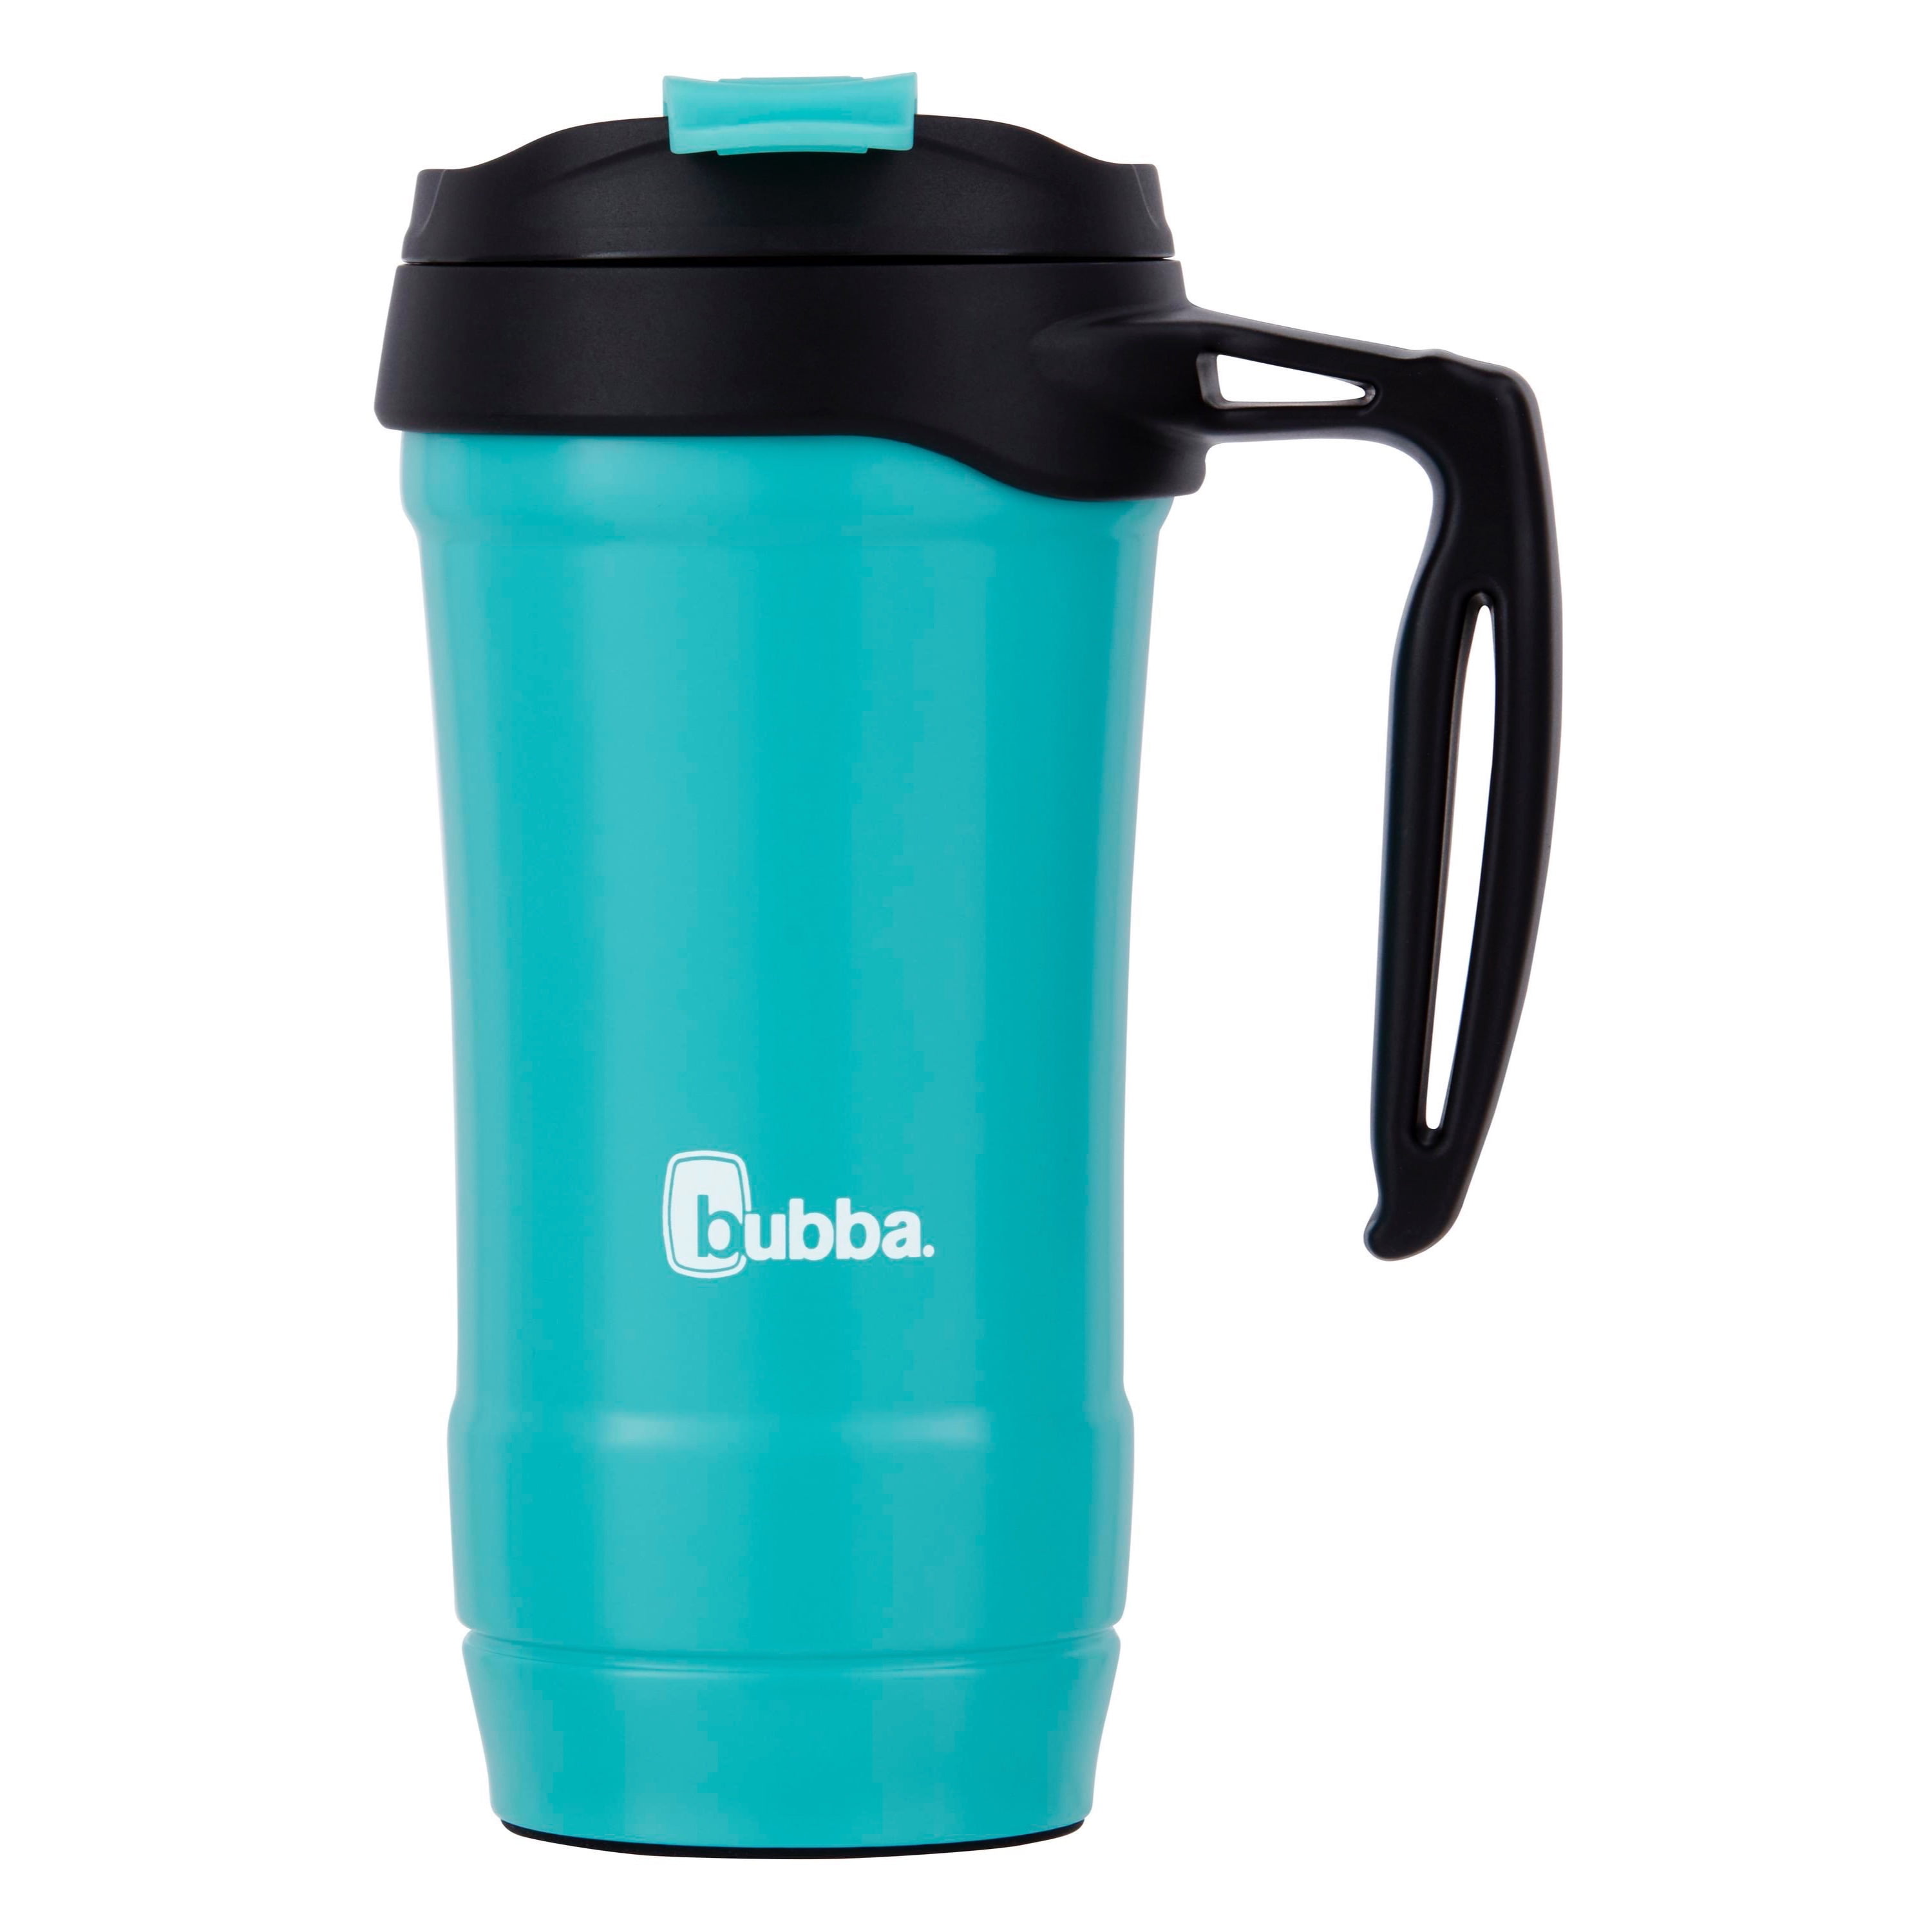 Bubba Insulated Thermos Travel Mug Hot Cold Coffee